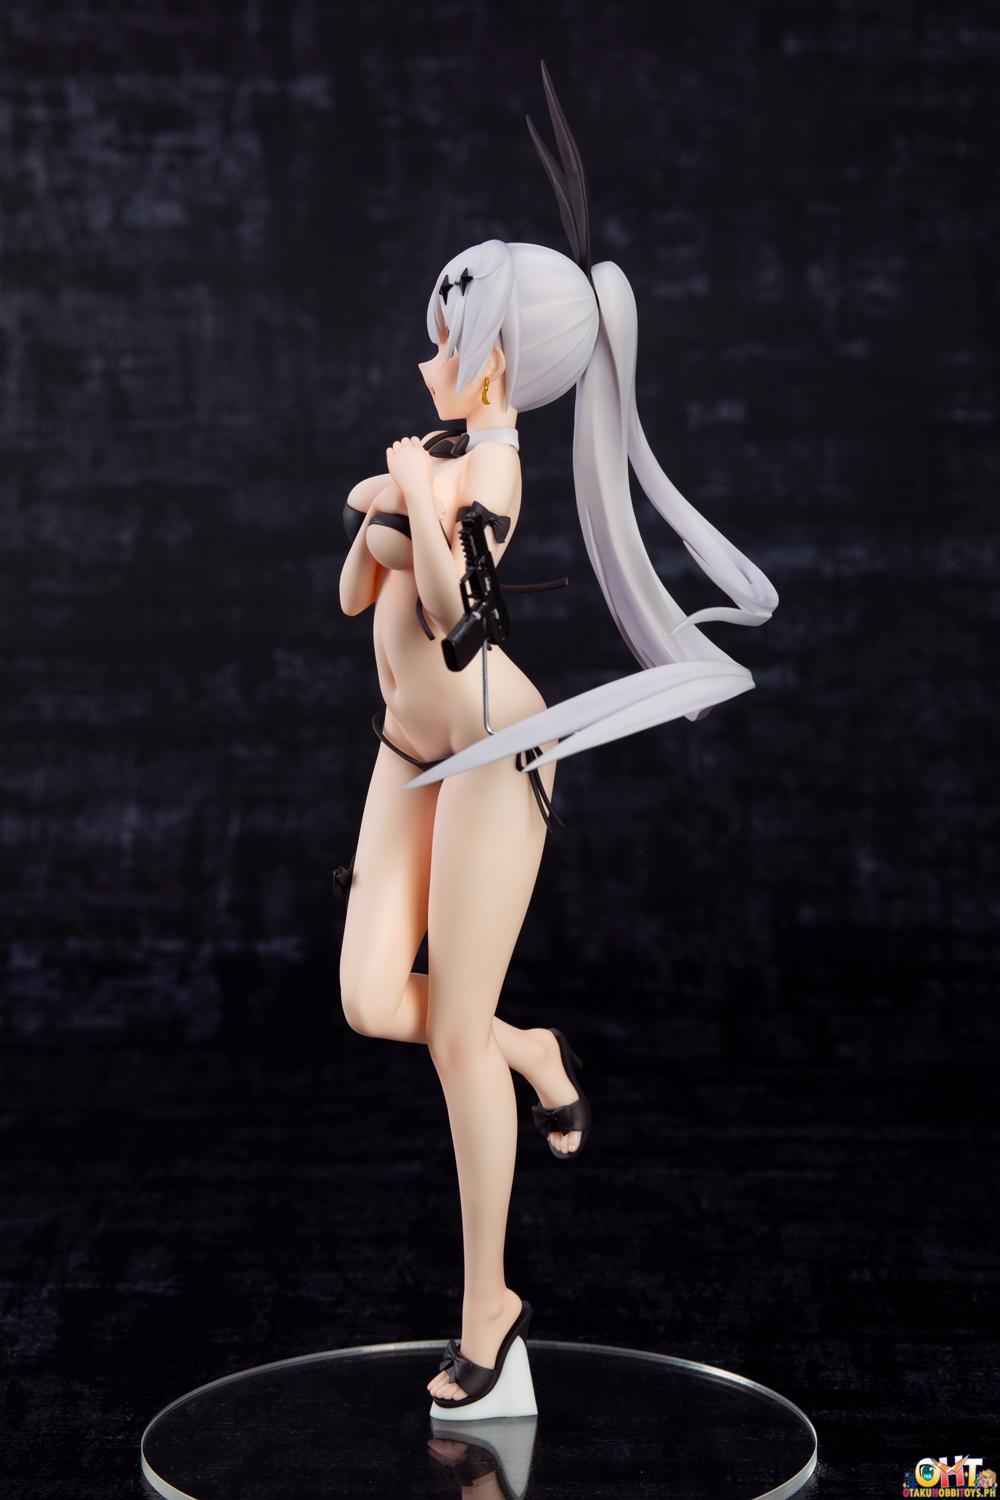 Phalaeno Girls' Frontline 1/7 Five-seven Swimsuit Heavily Damaged Ver. (Cruise Queen)